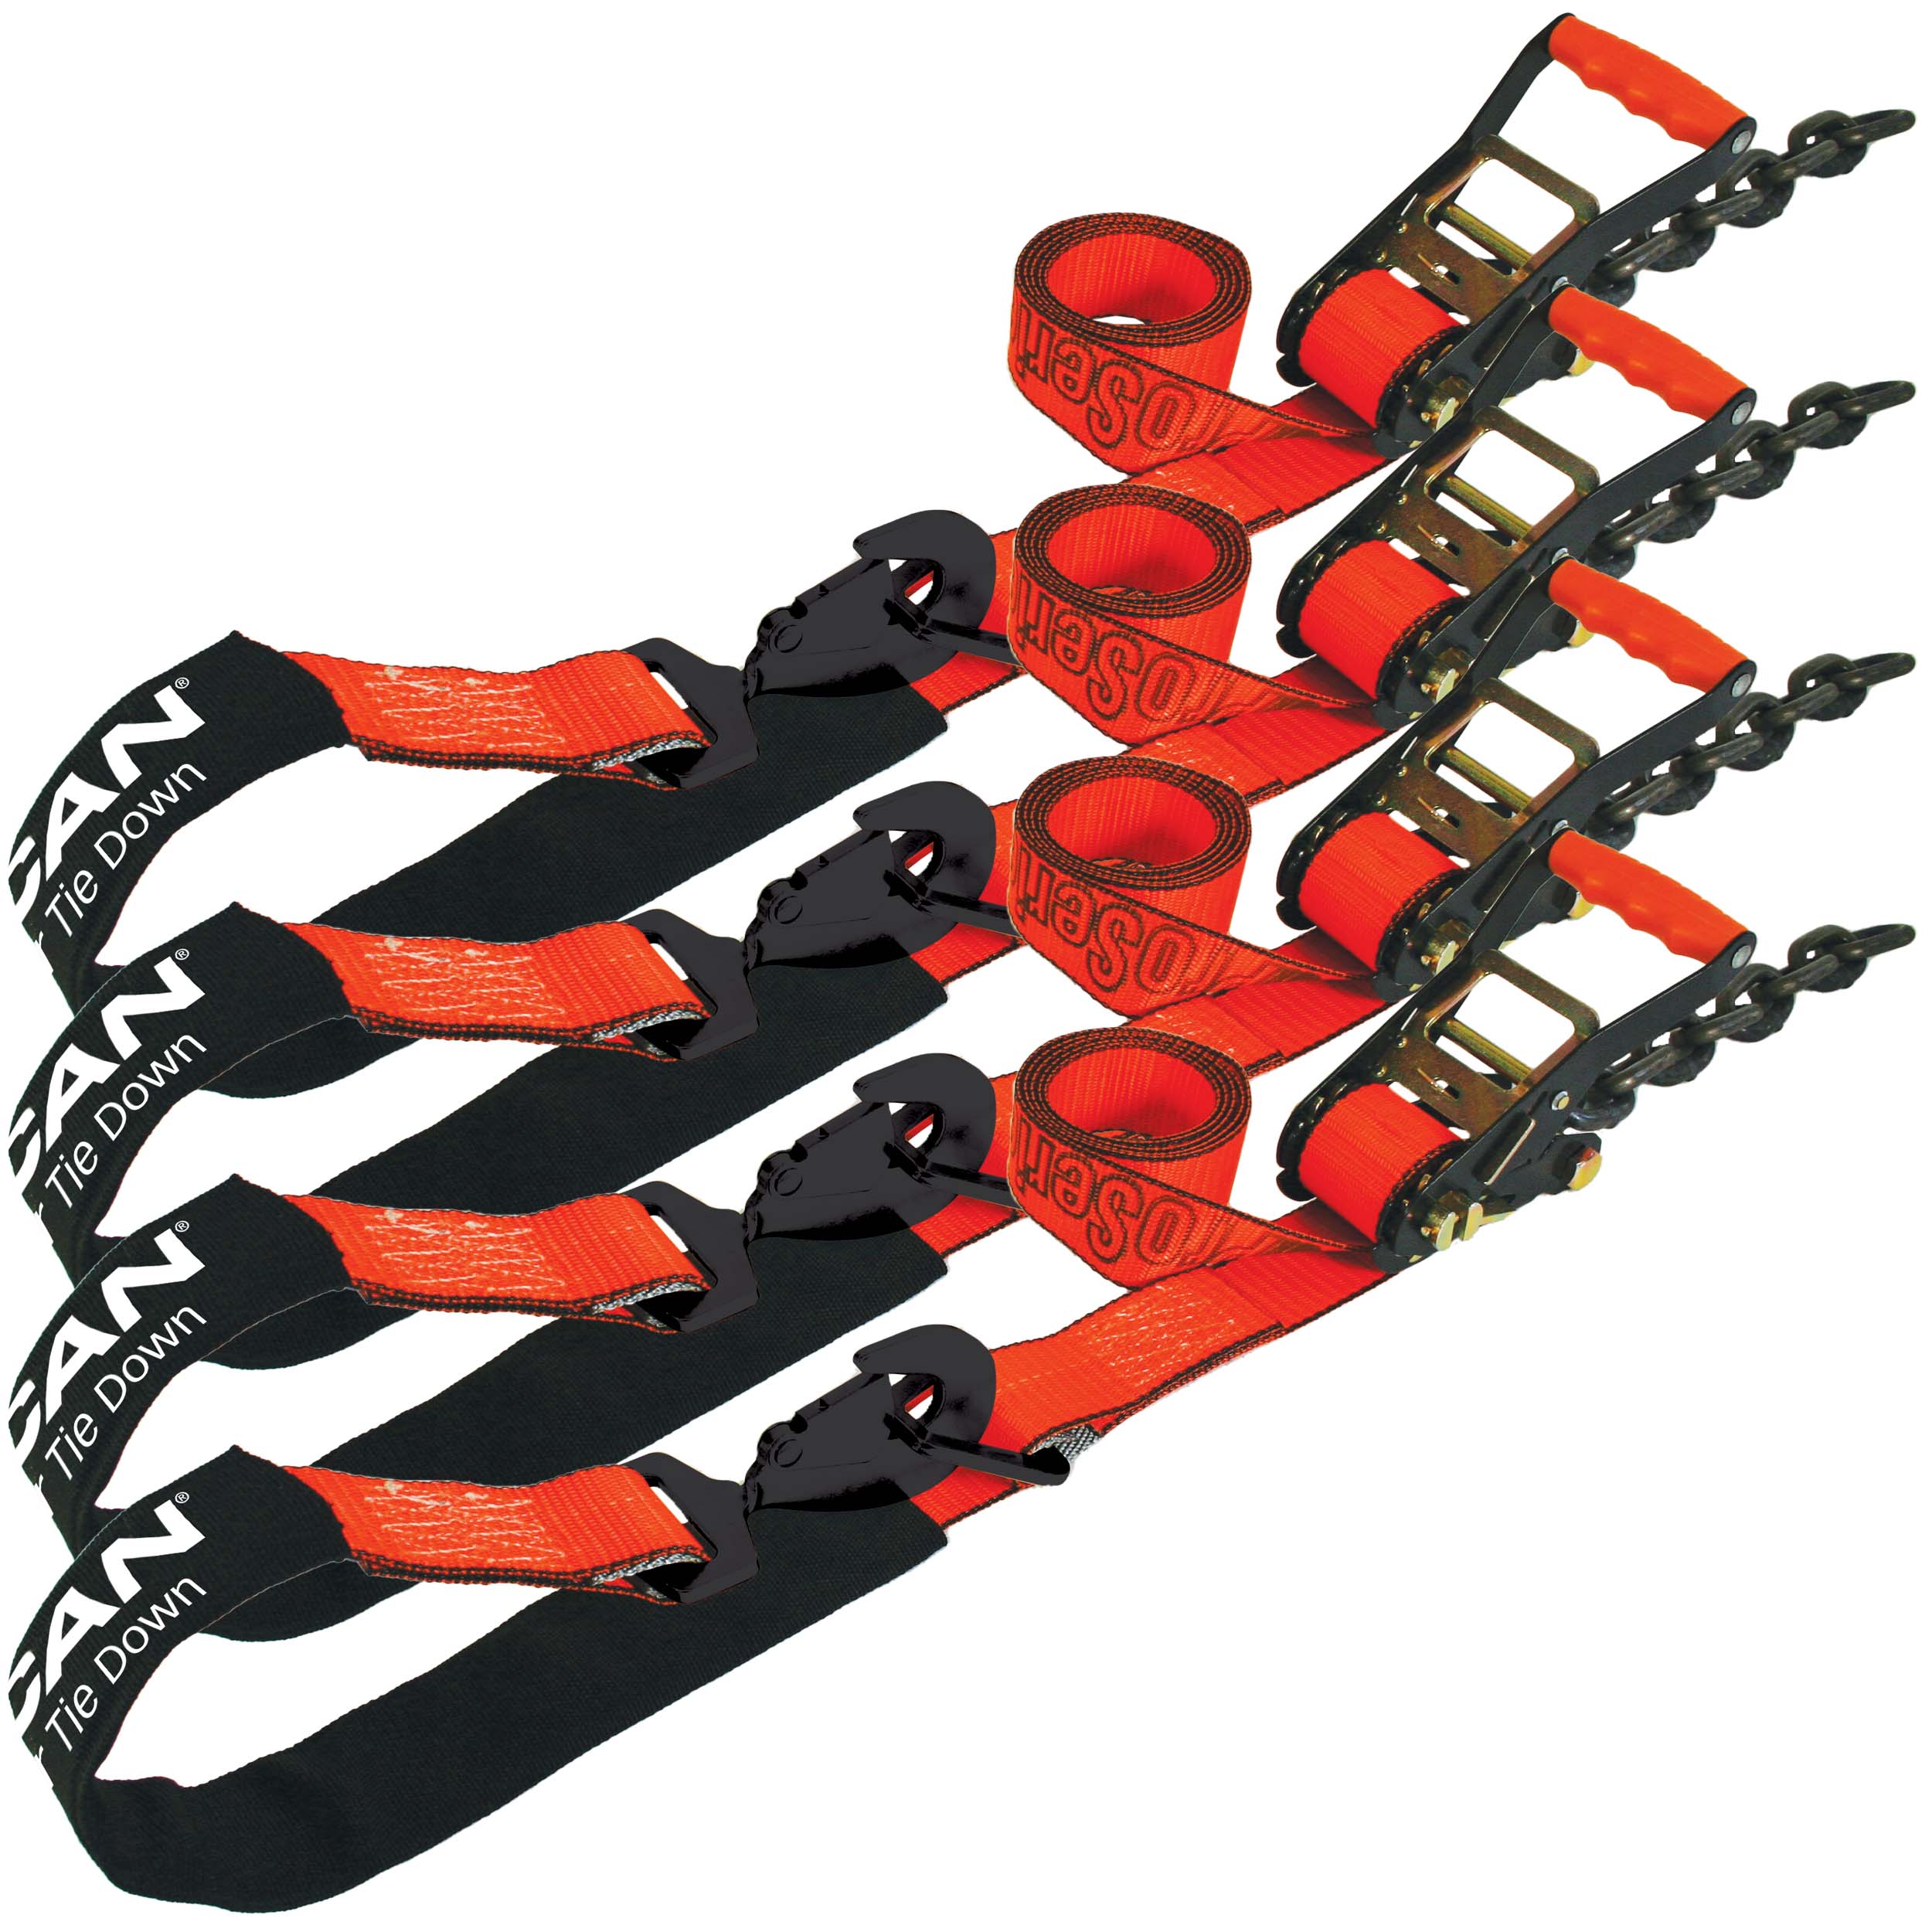 Professional Grade Tow Truck Axle Strap With Chain Tails